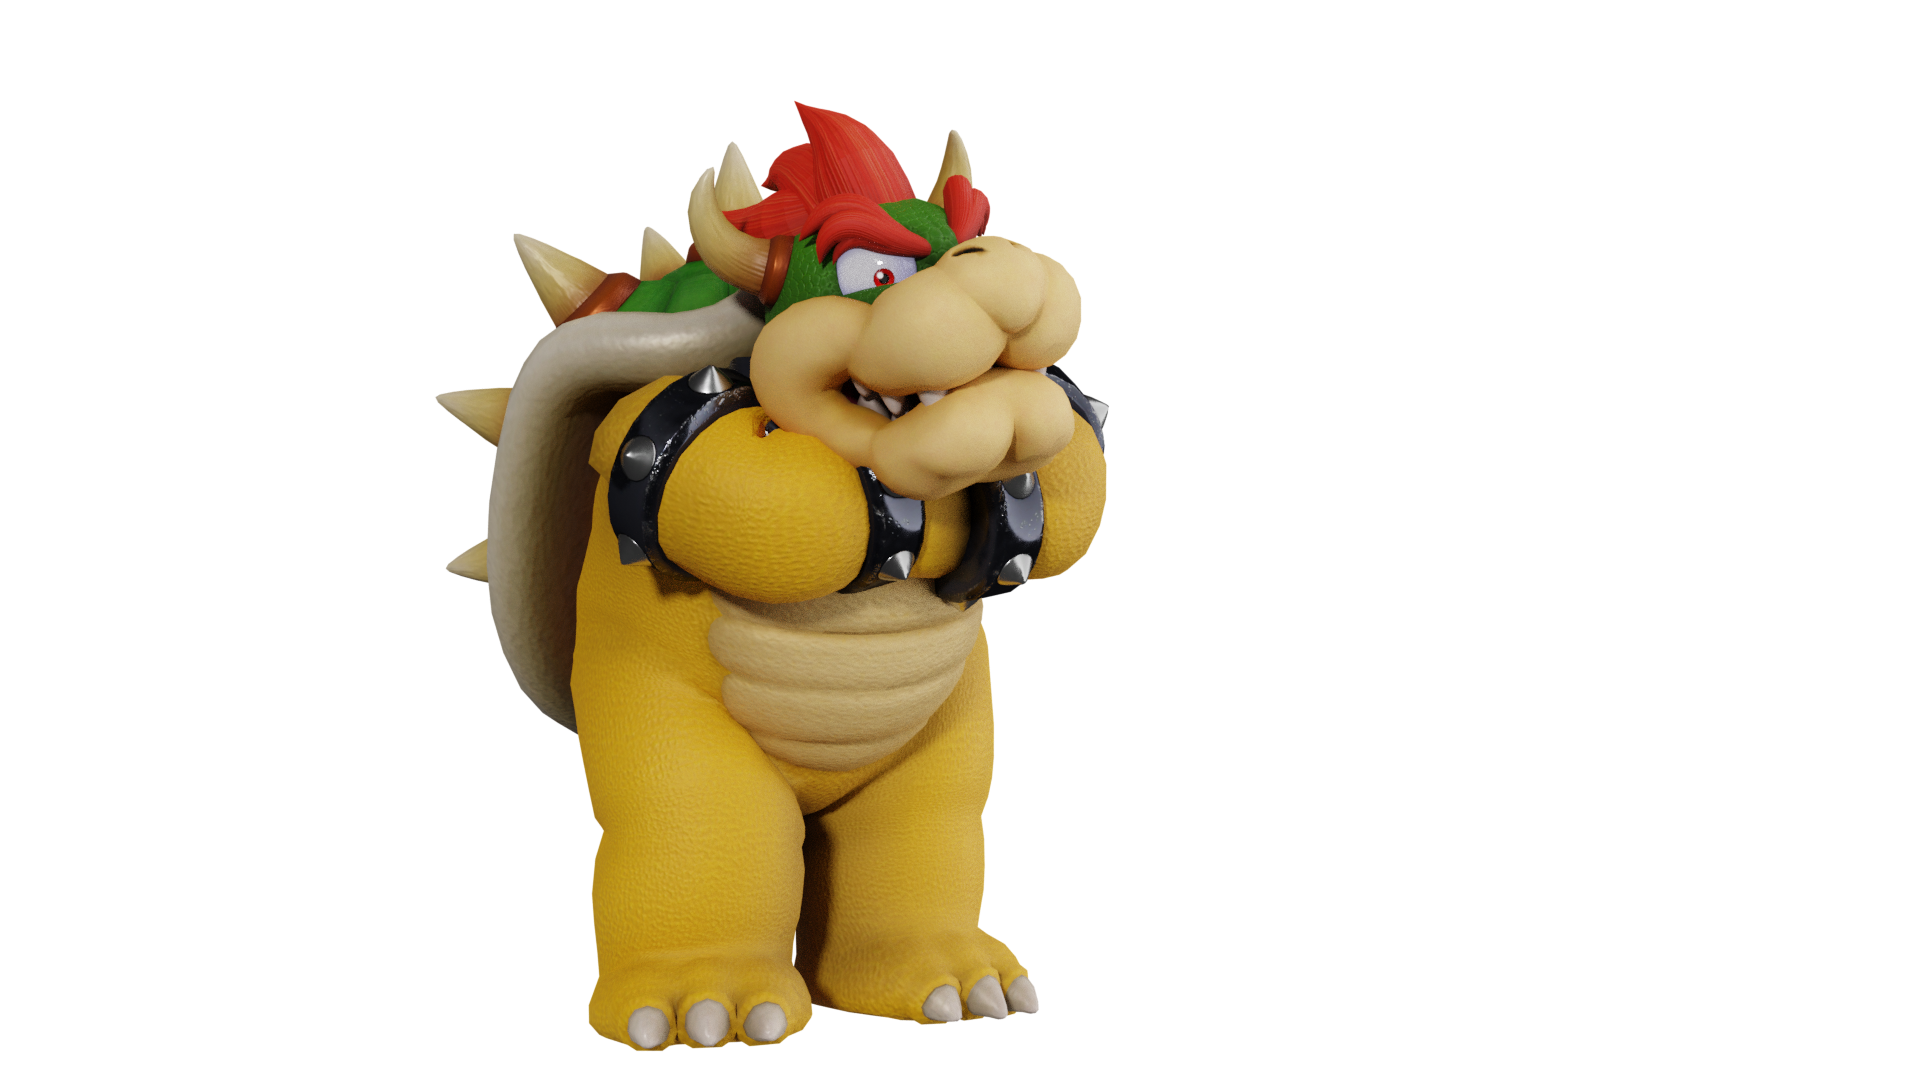 Bowser  Super Mario Bros - Finished Projects - Blender Artists Community